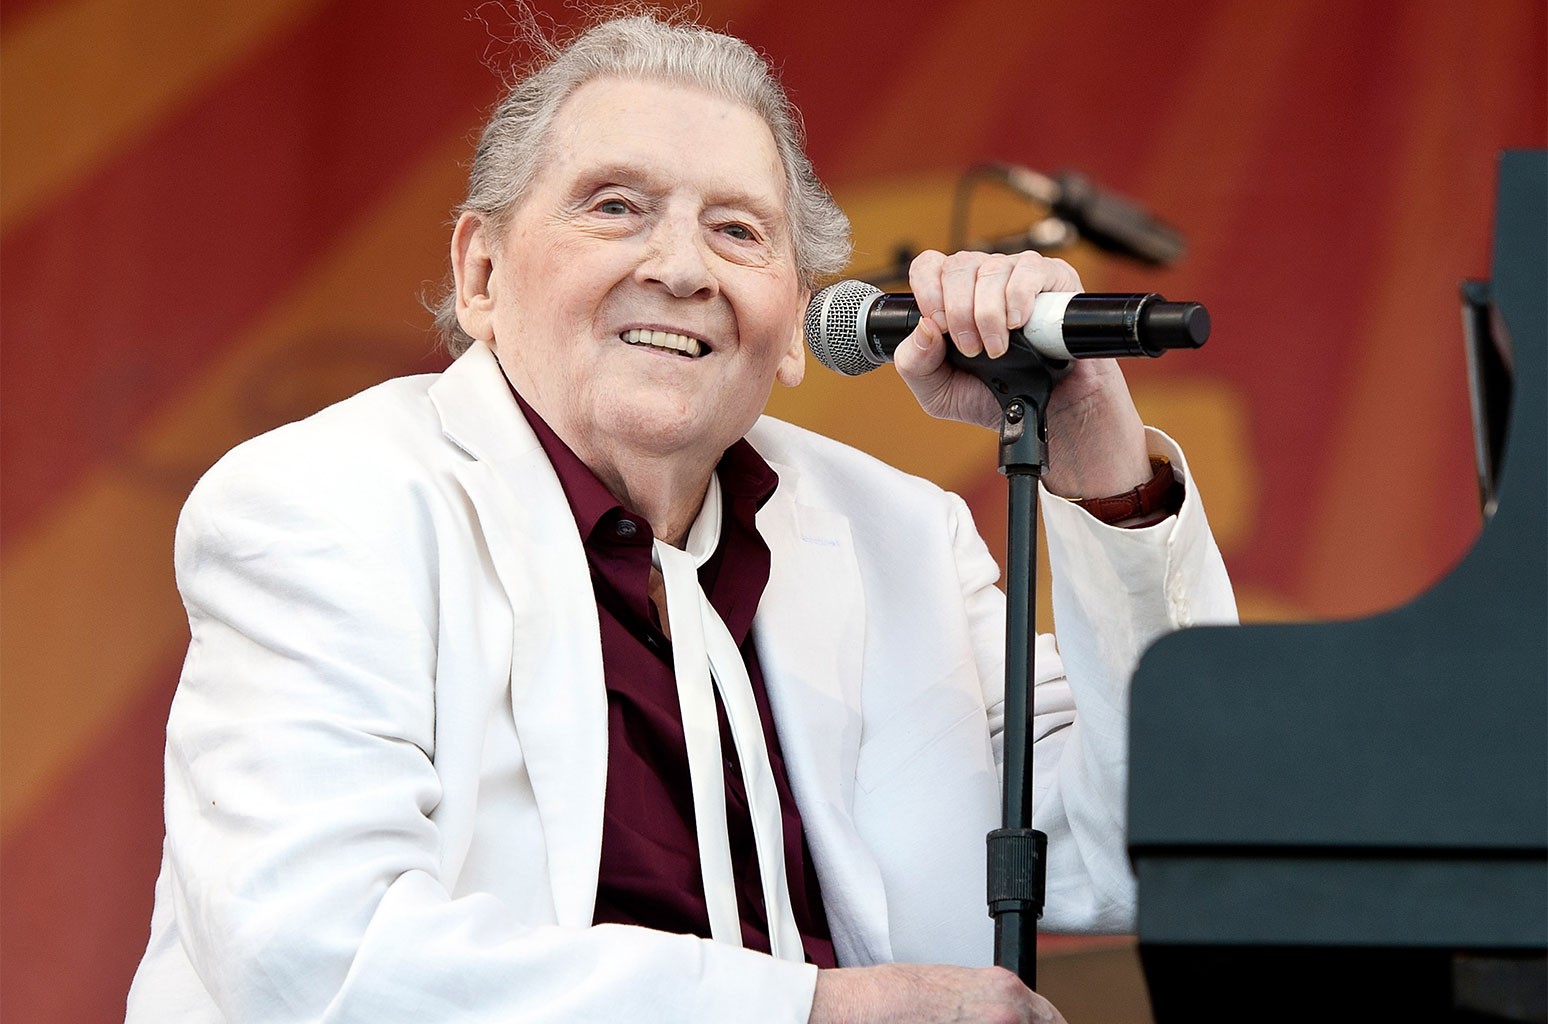 Jerry Lee Lewis Biography: The Life of a Legendary American Musician